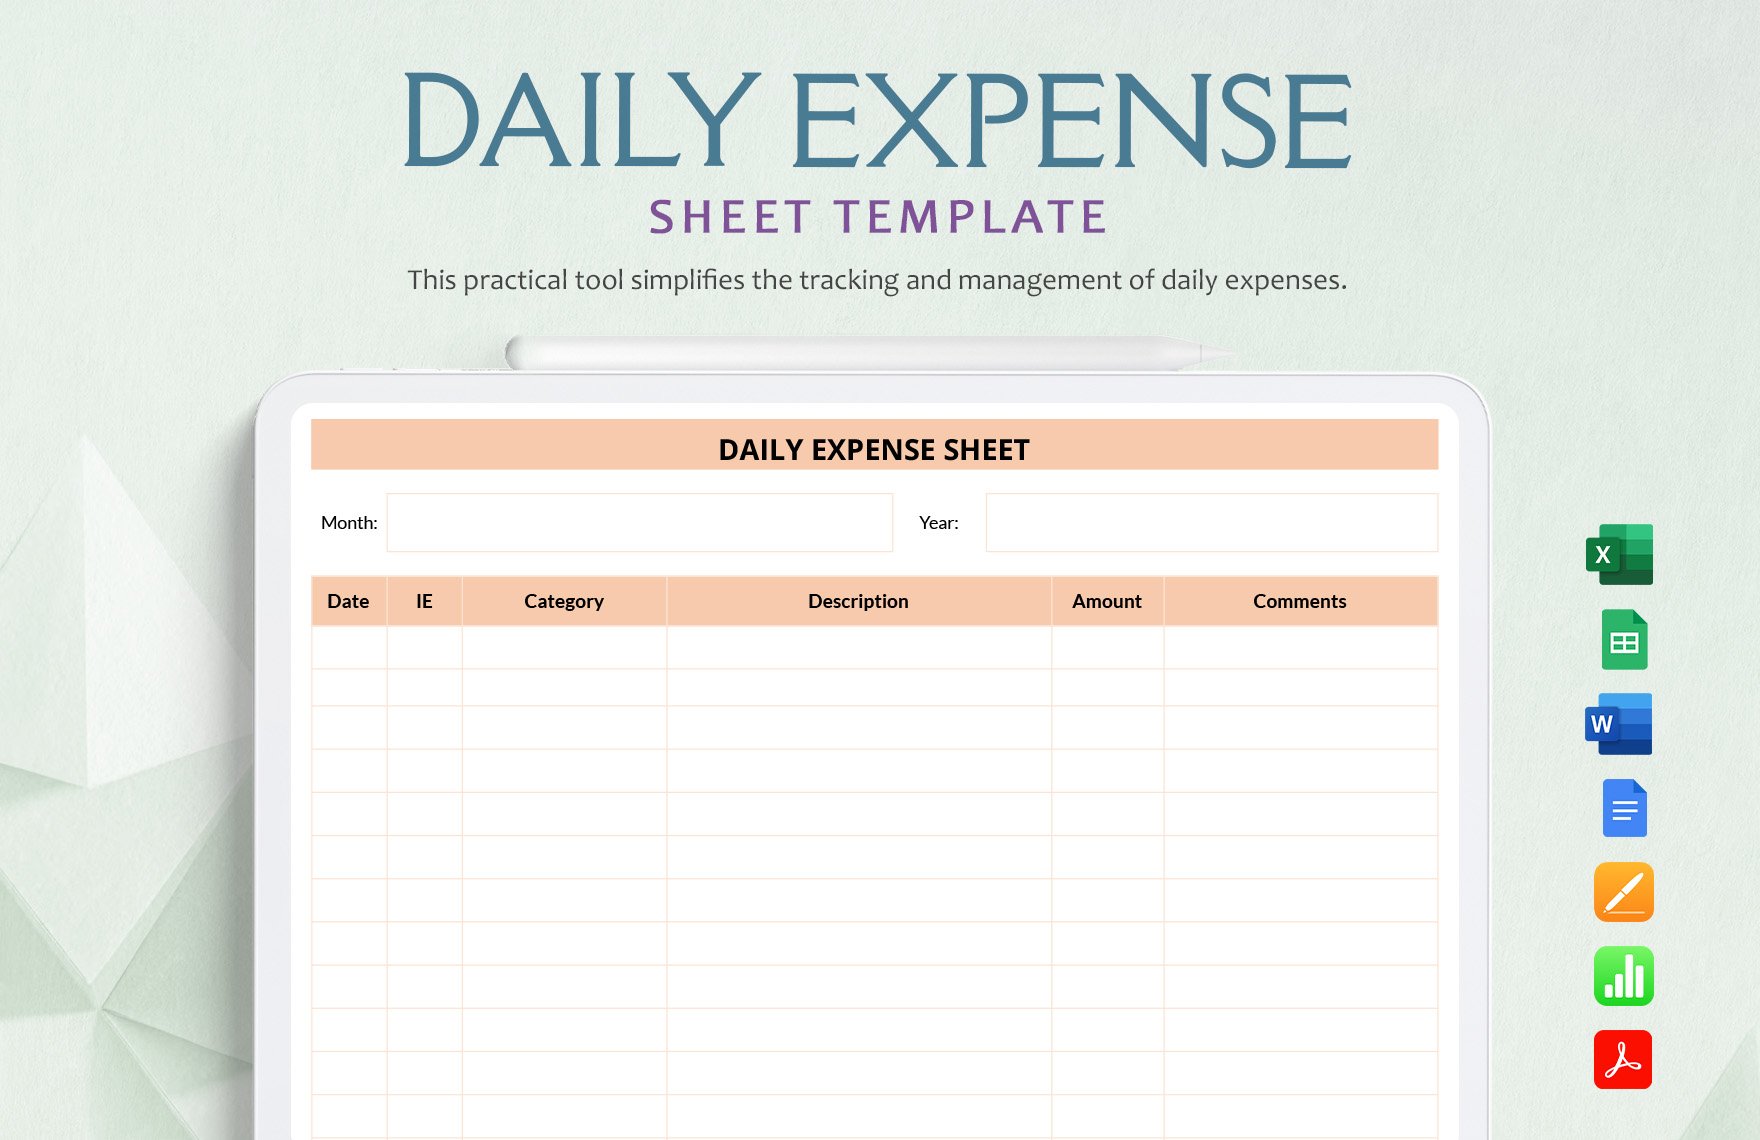 Daily Expense Sheet Template in Word, Google Docs, Excel, PDF, Google Sheets, Apple Pages, Apple Numbers